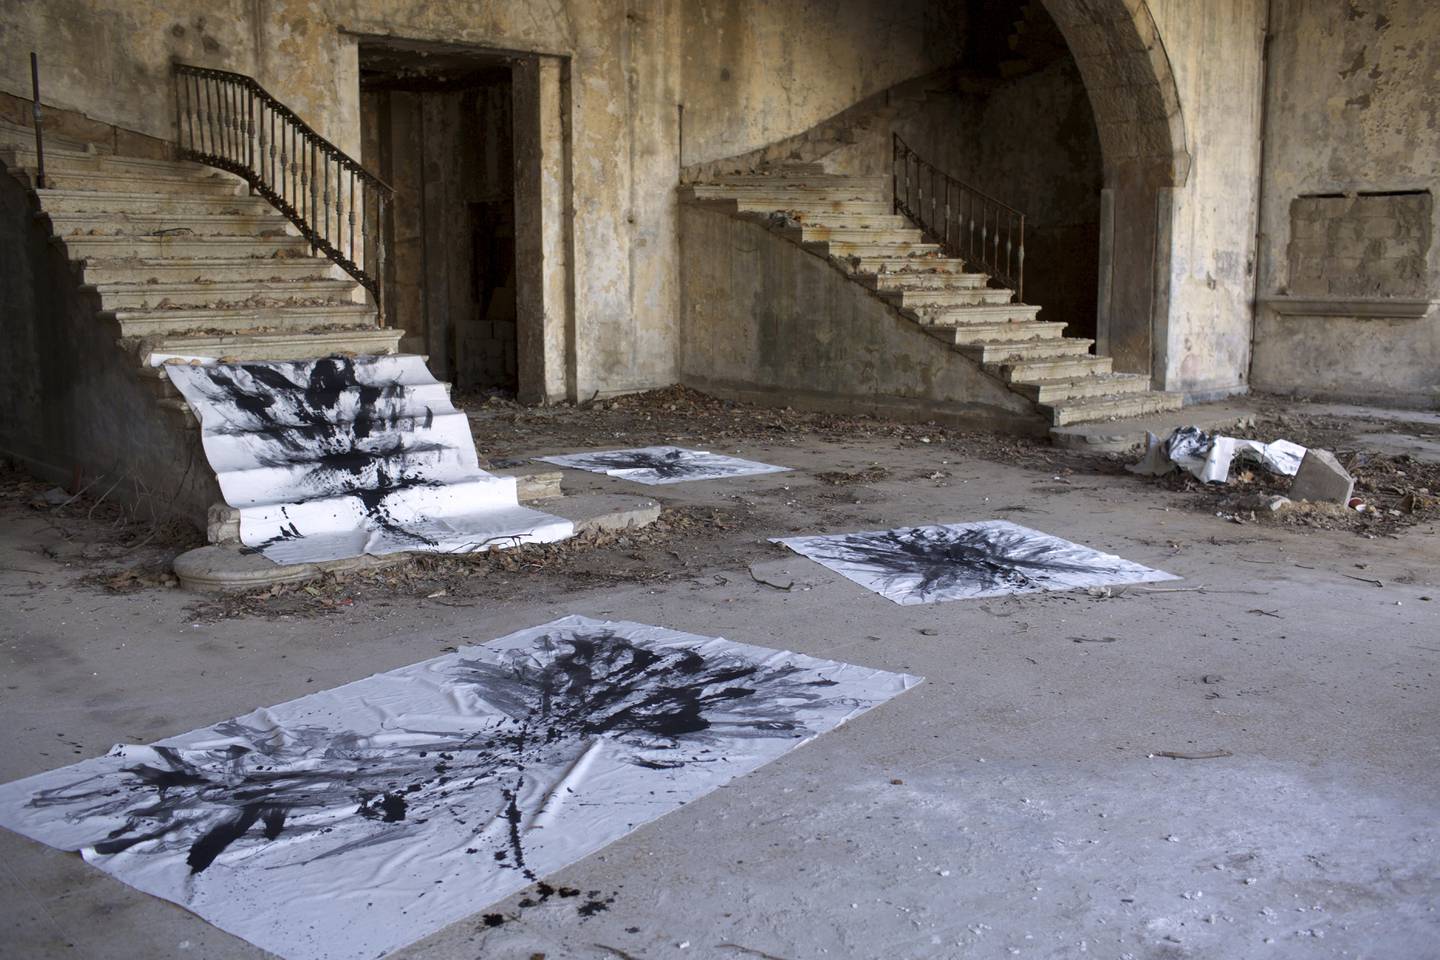 Over 20 paintings by Zena El Khalil are exhibited at Beit Beirut, created at site-specific locations such as the Grand Hotel Sawar. Courtesy Zena Al Khalil